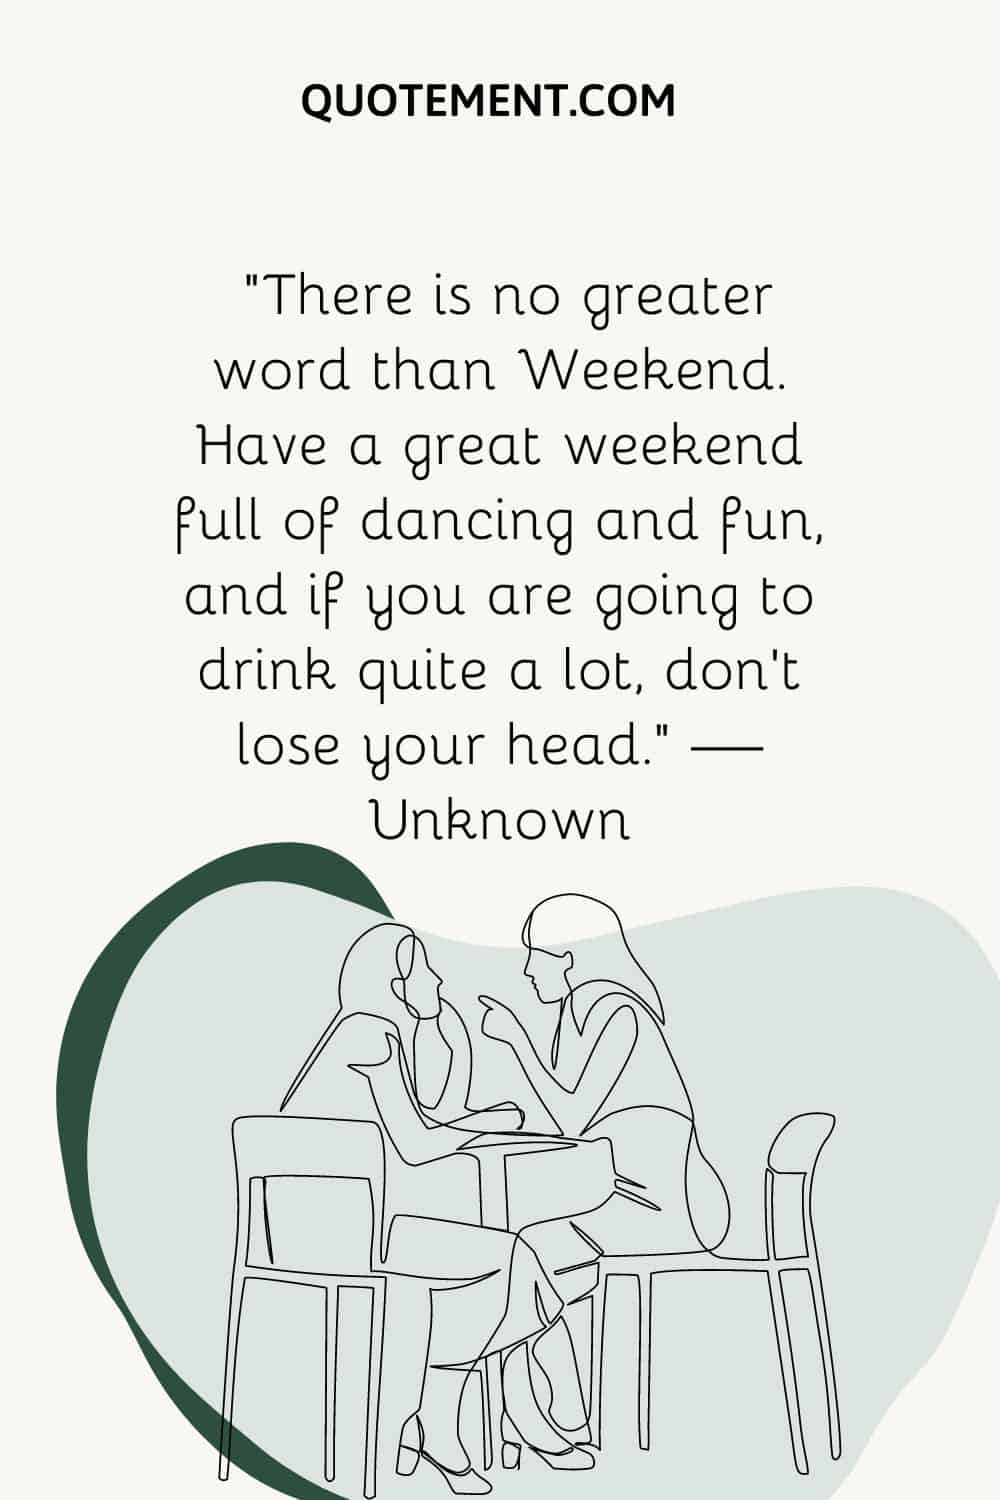 “There is no greater word than Weekend. Have a great weekend full of dancing and fun, and if you are going to drink quite a lot, don’t lose your head.” — Unknown